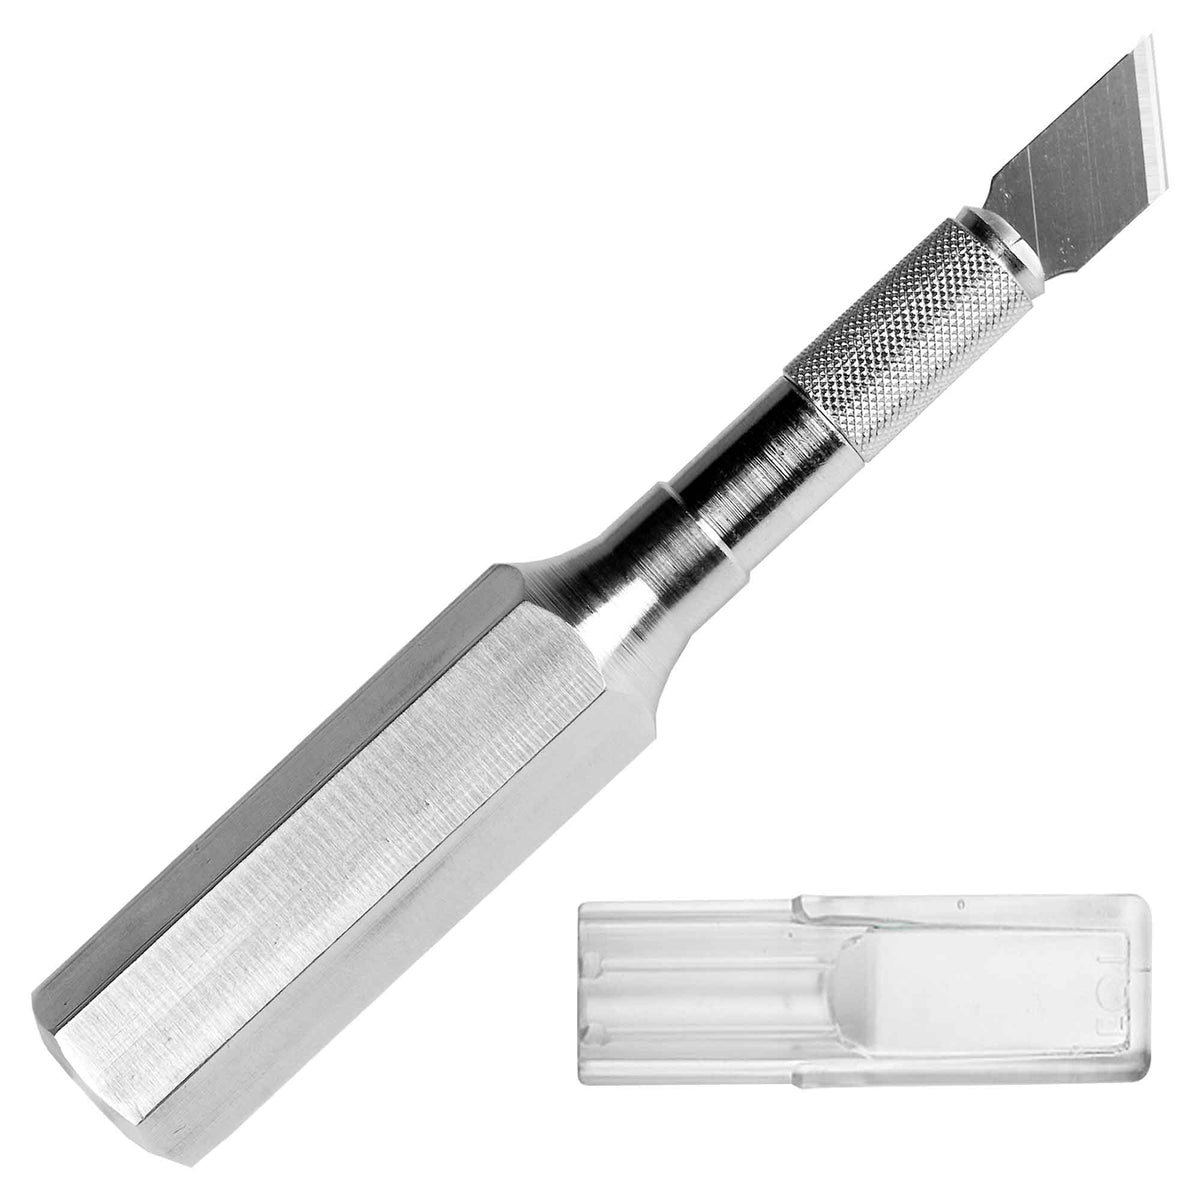 Excel Blades K30 Hobby Knife with Hexagonal Anti Roll Design